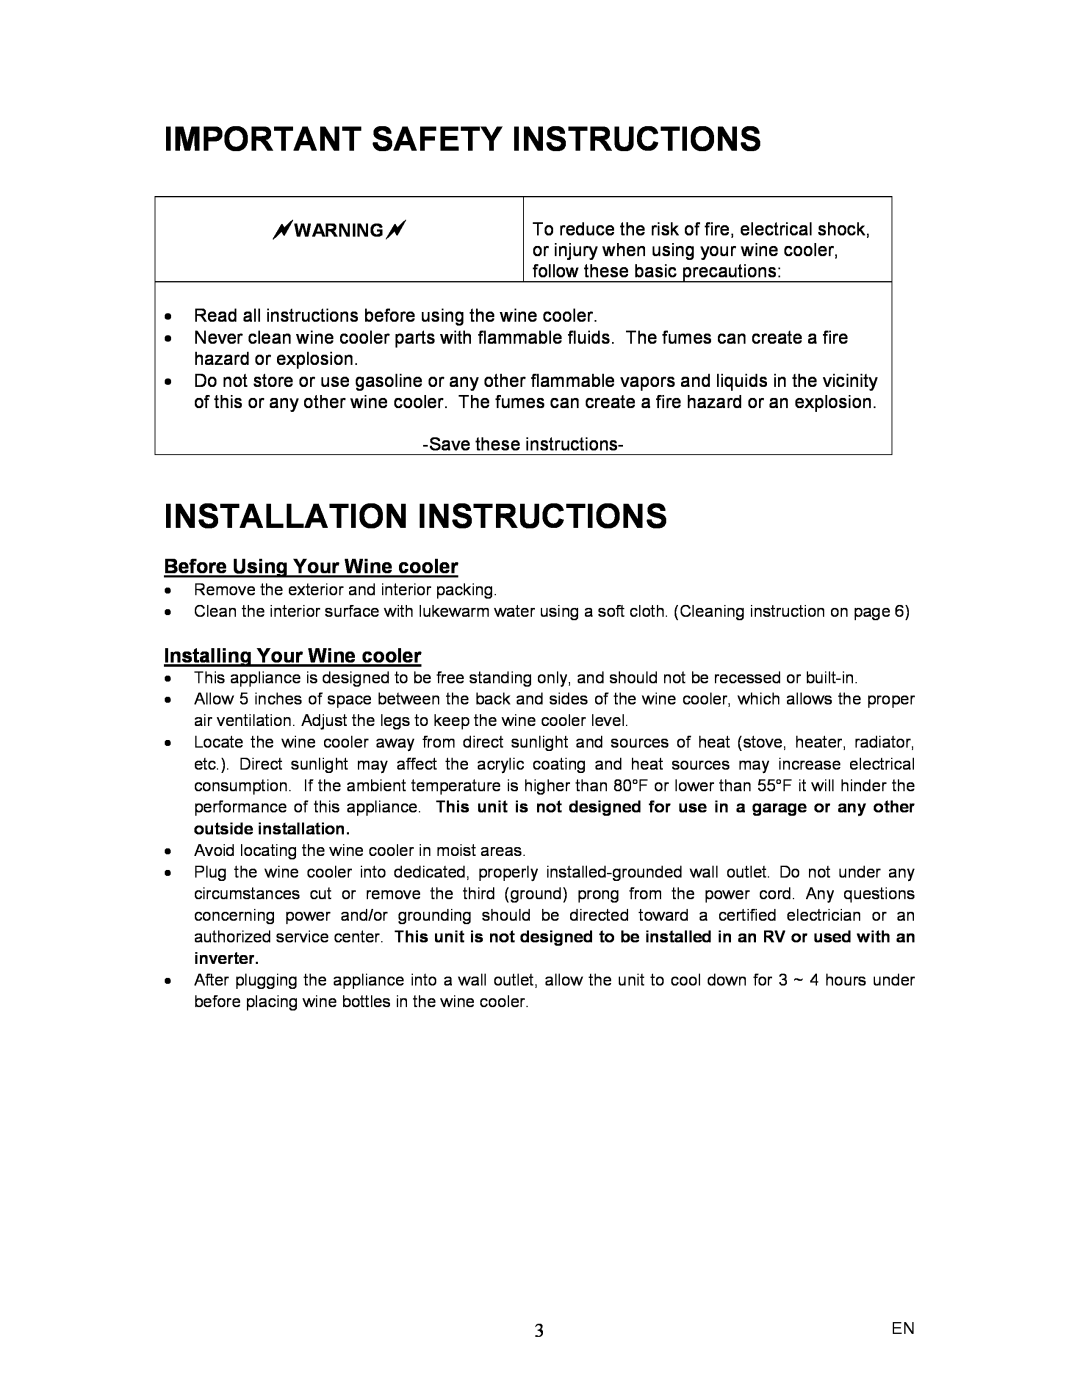 Magic Chef MCWC6B Important Safety Instructions, Installation Instructions, Before Using Your Wine cooler 